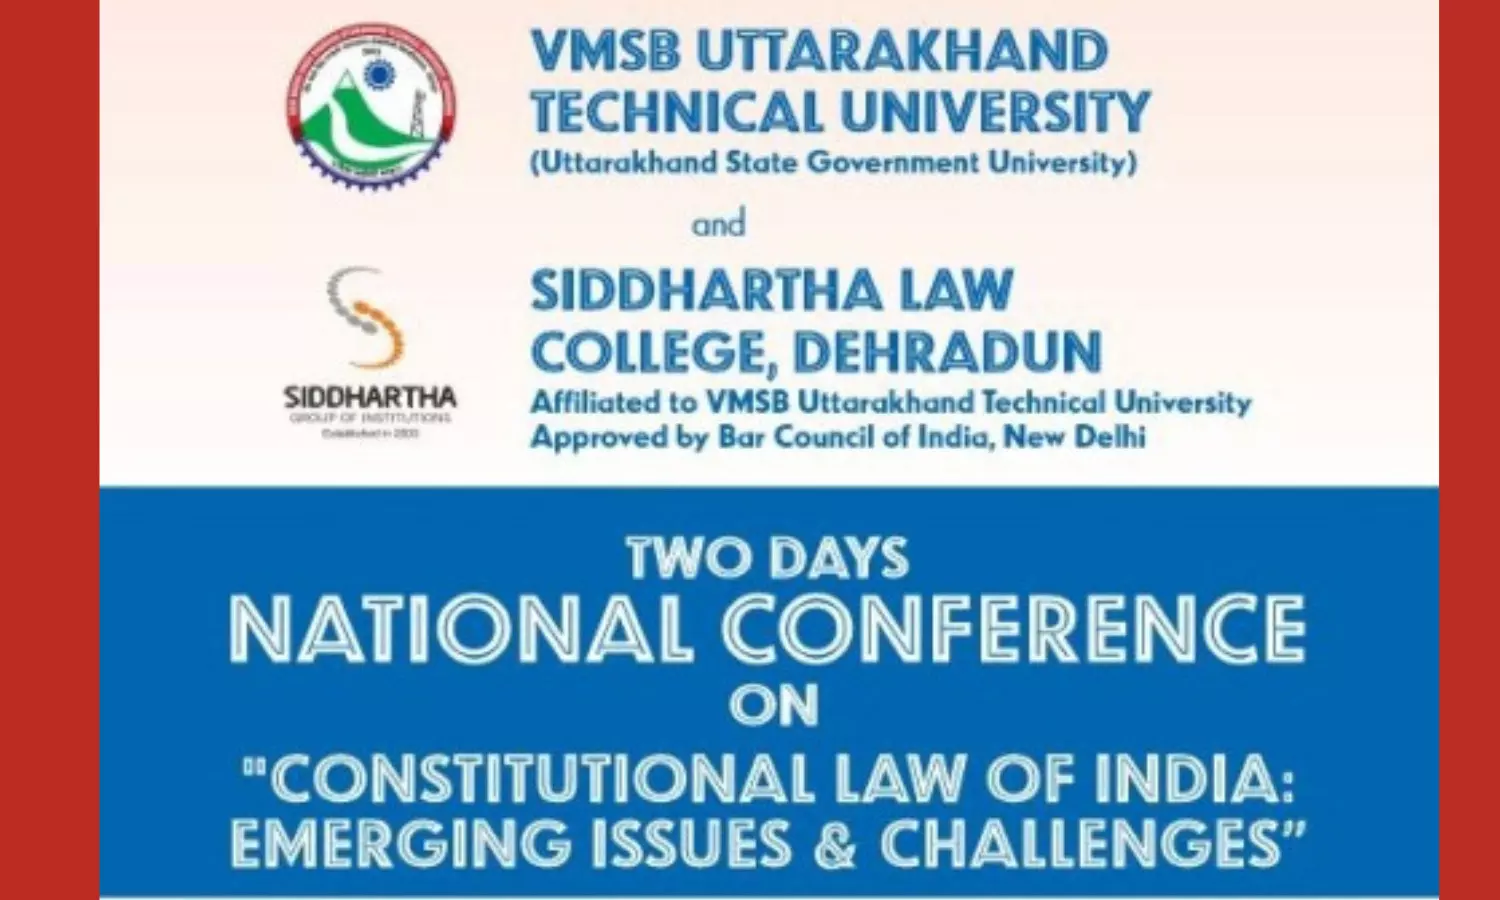 Call for Paper | Two Days National Conference on Constitutional Law of India | Siddhartha Law College, Dehradun